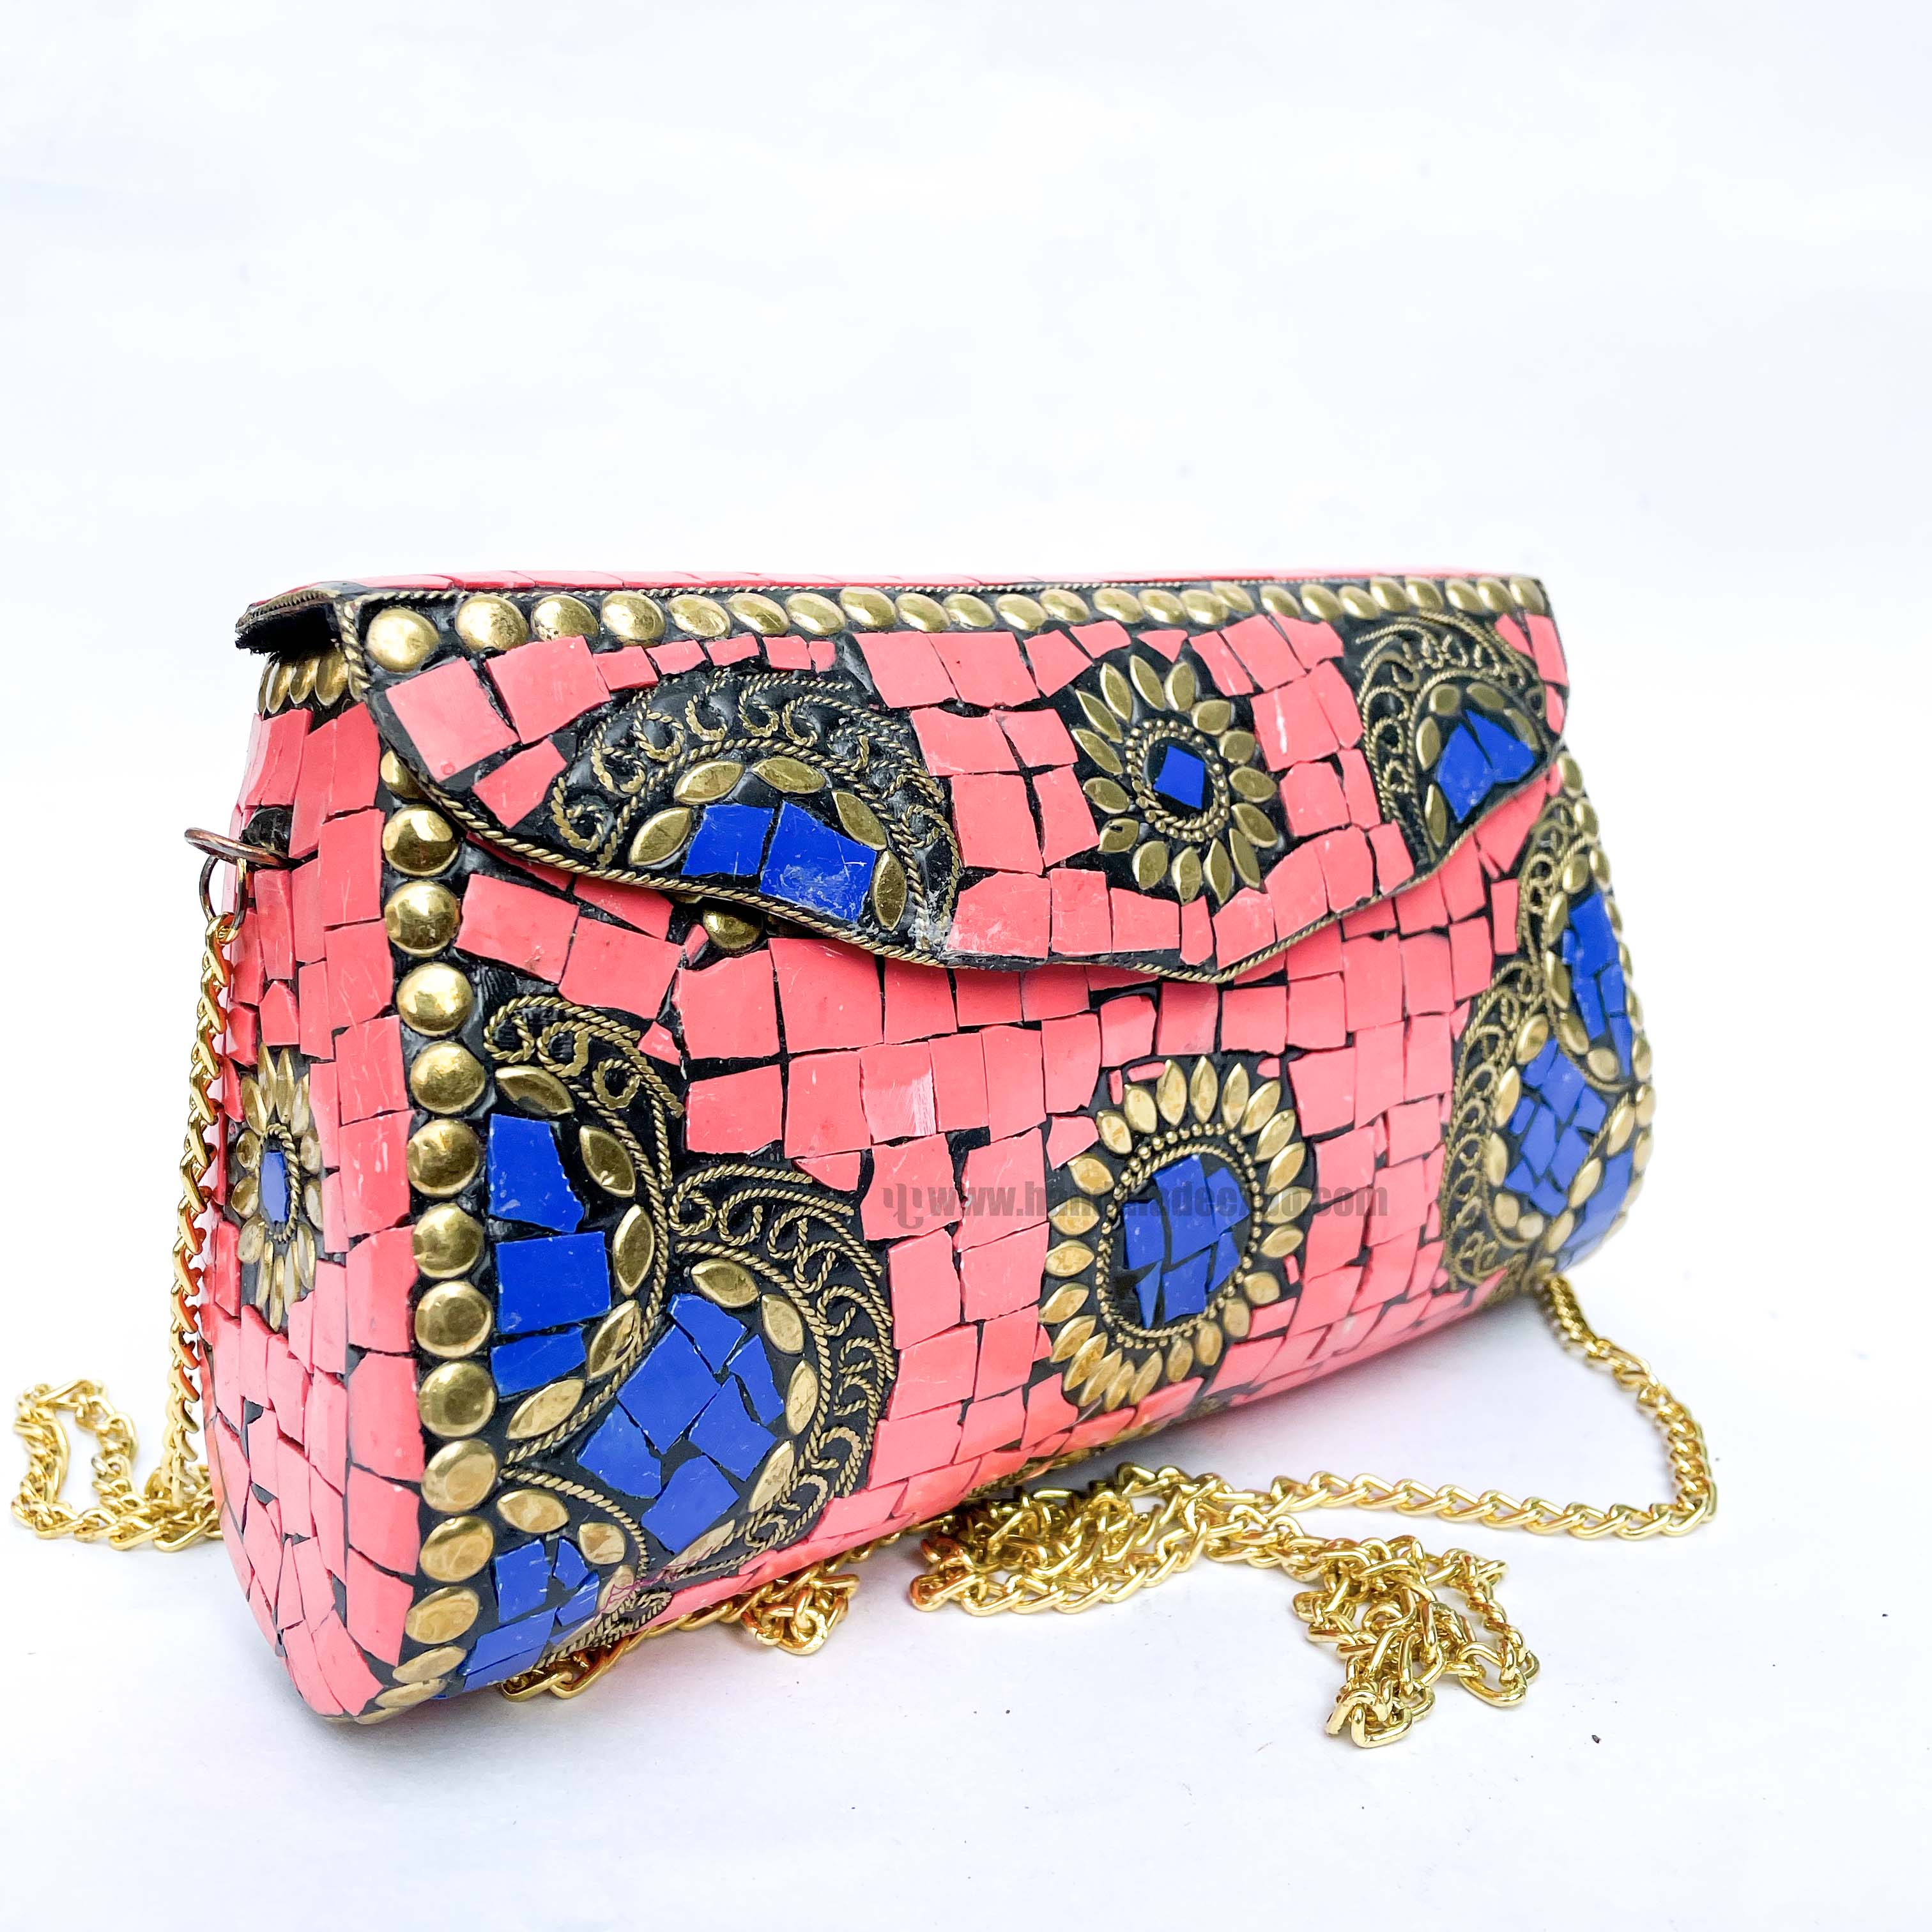 Nepali Handmade Large Size Ladies Bag With stone Setting, metal, pink And Blue Color